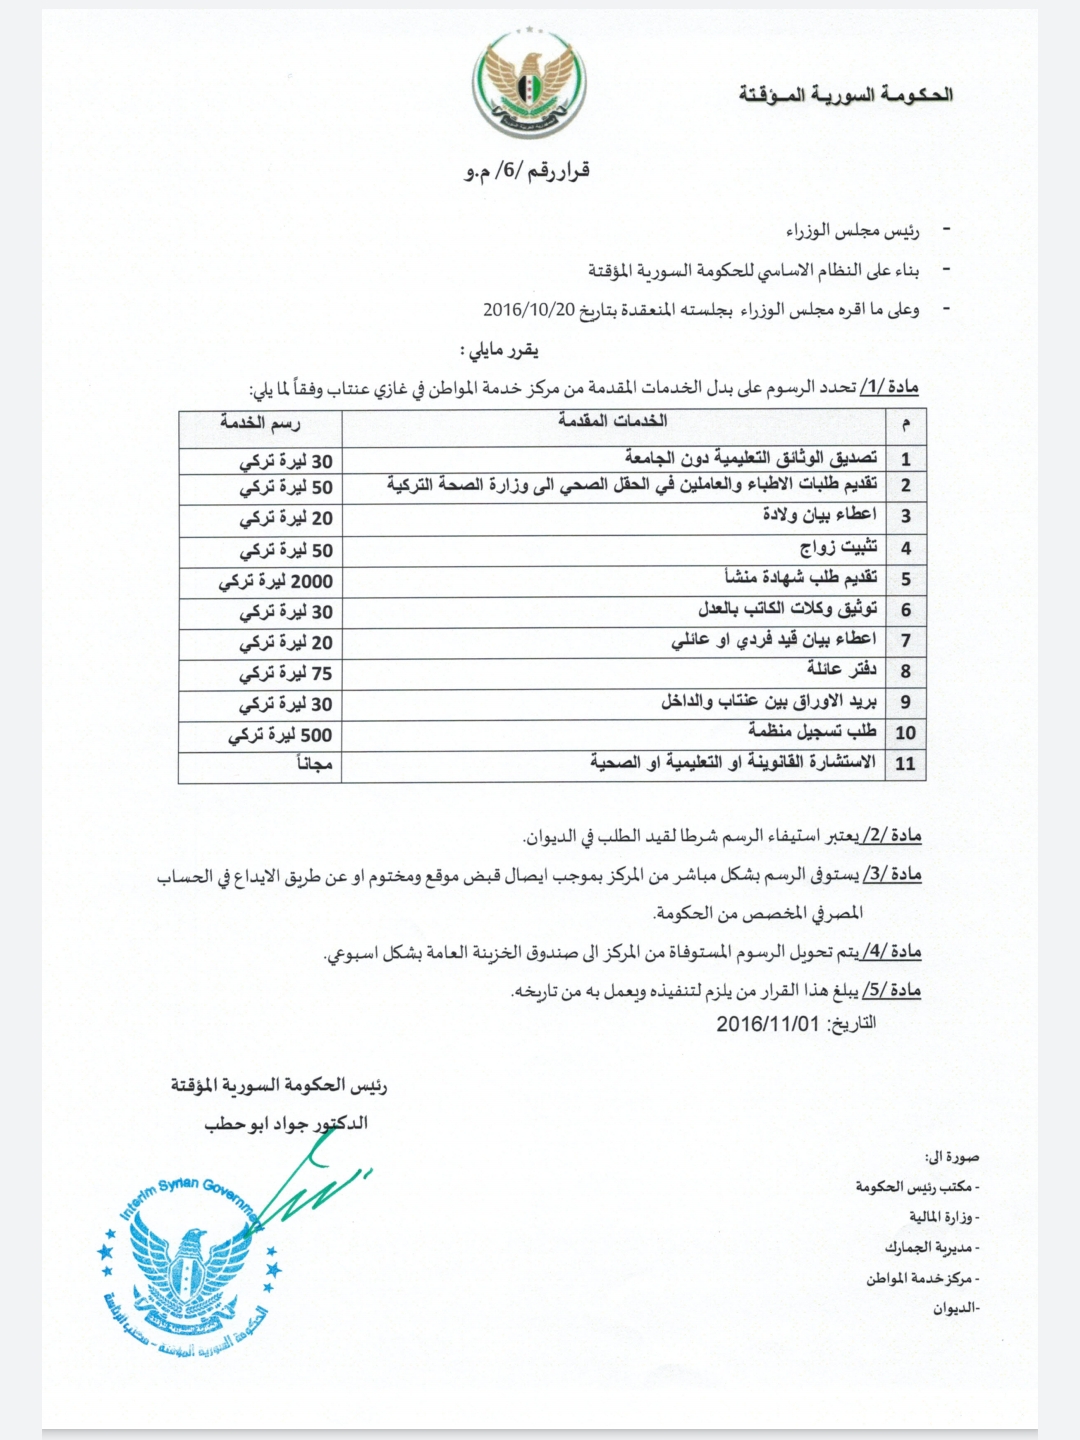 Authentication fees of various documents as set up by the SIG - 20 October 2016